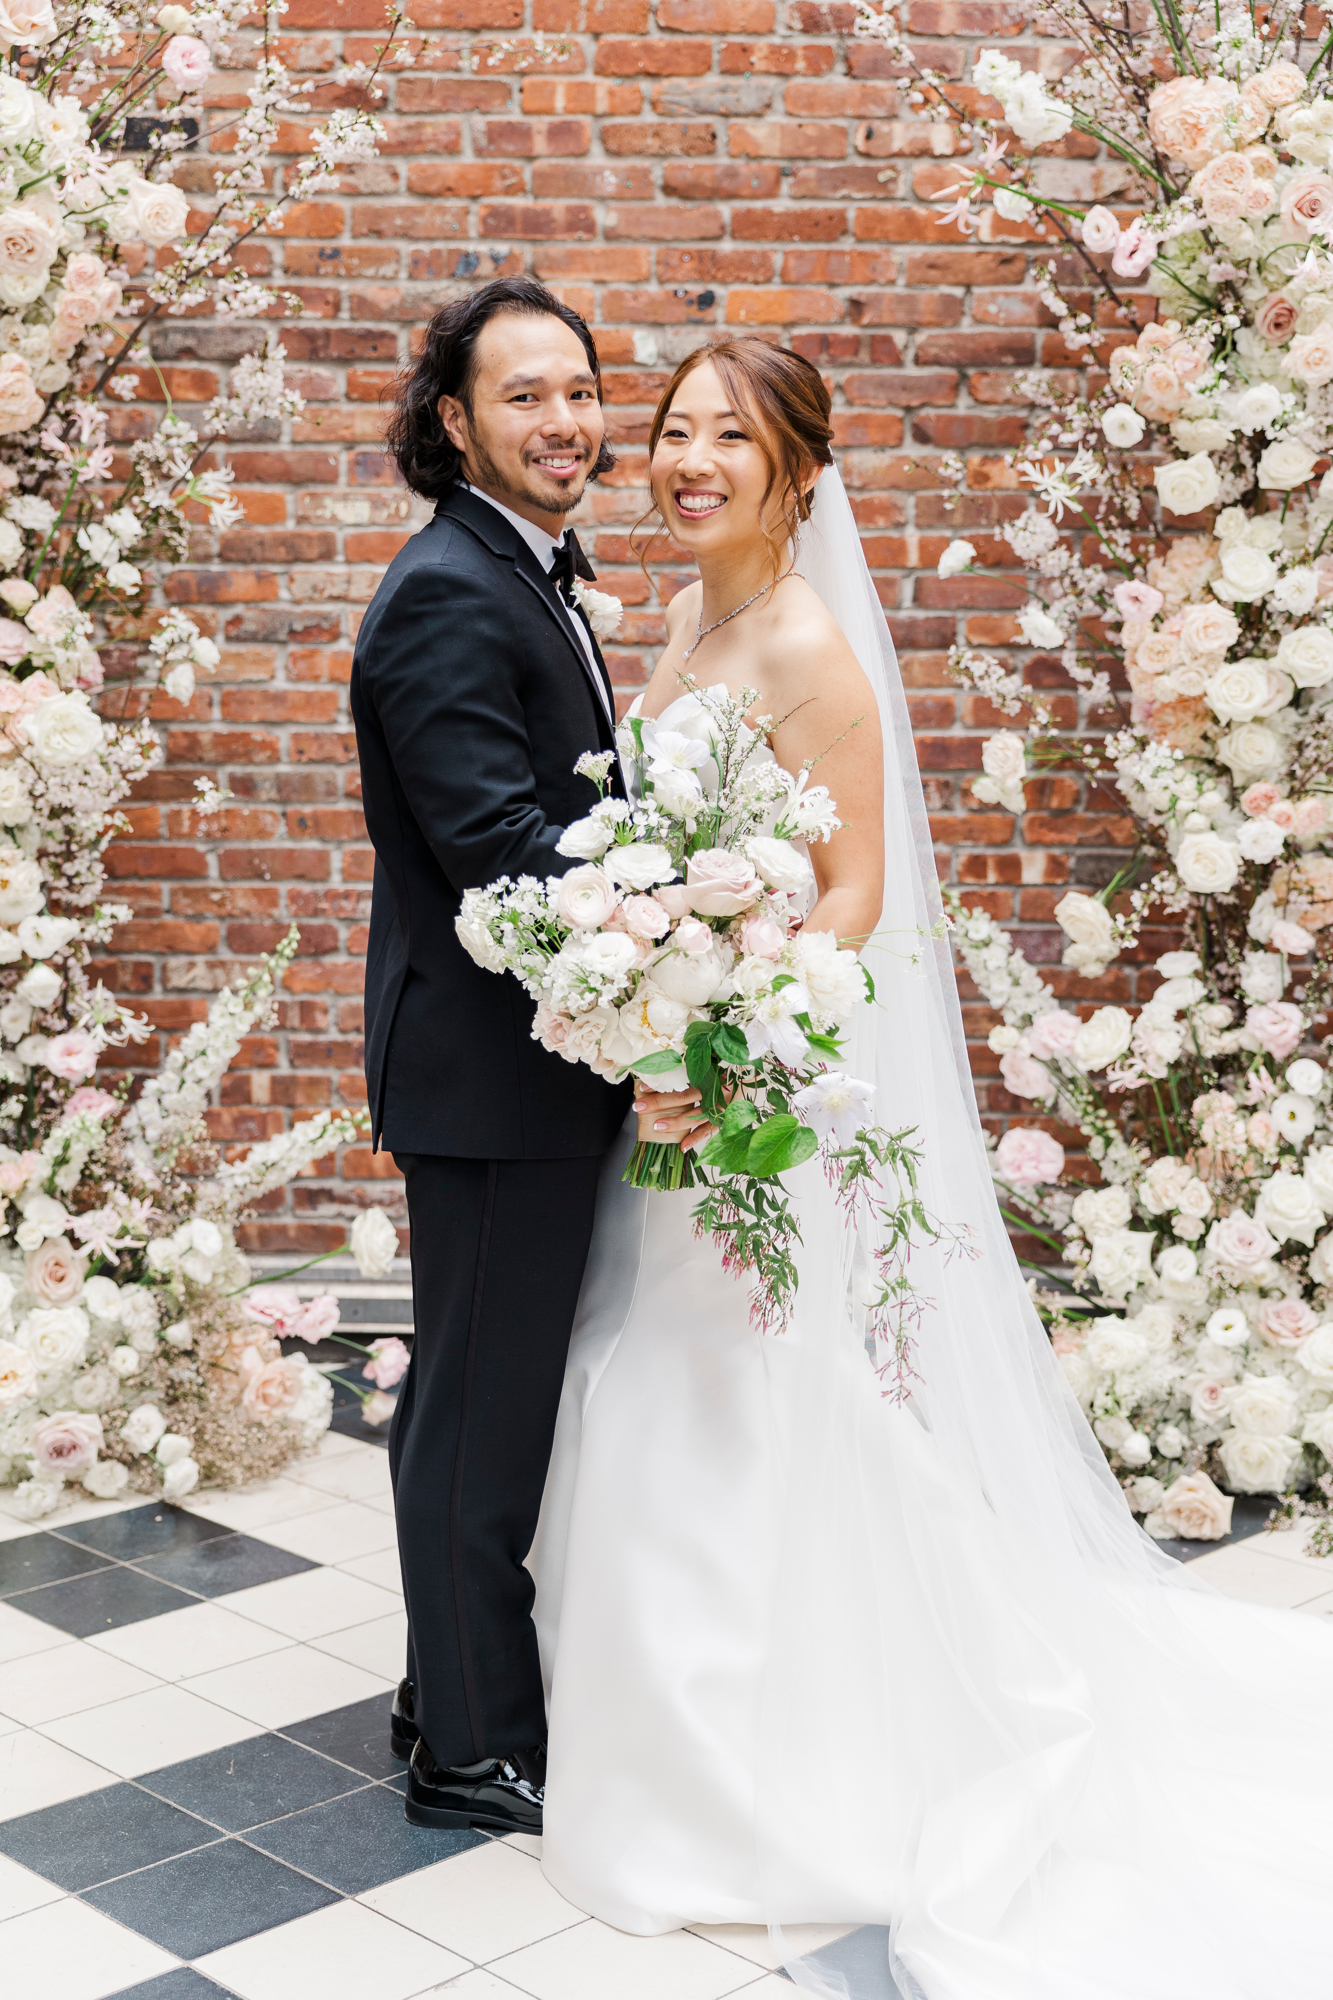 Awesome Wythe Hotel Wedding Photos in NYC